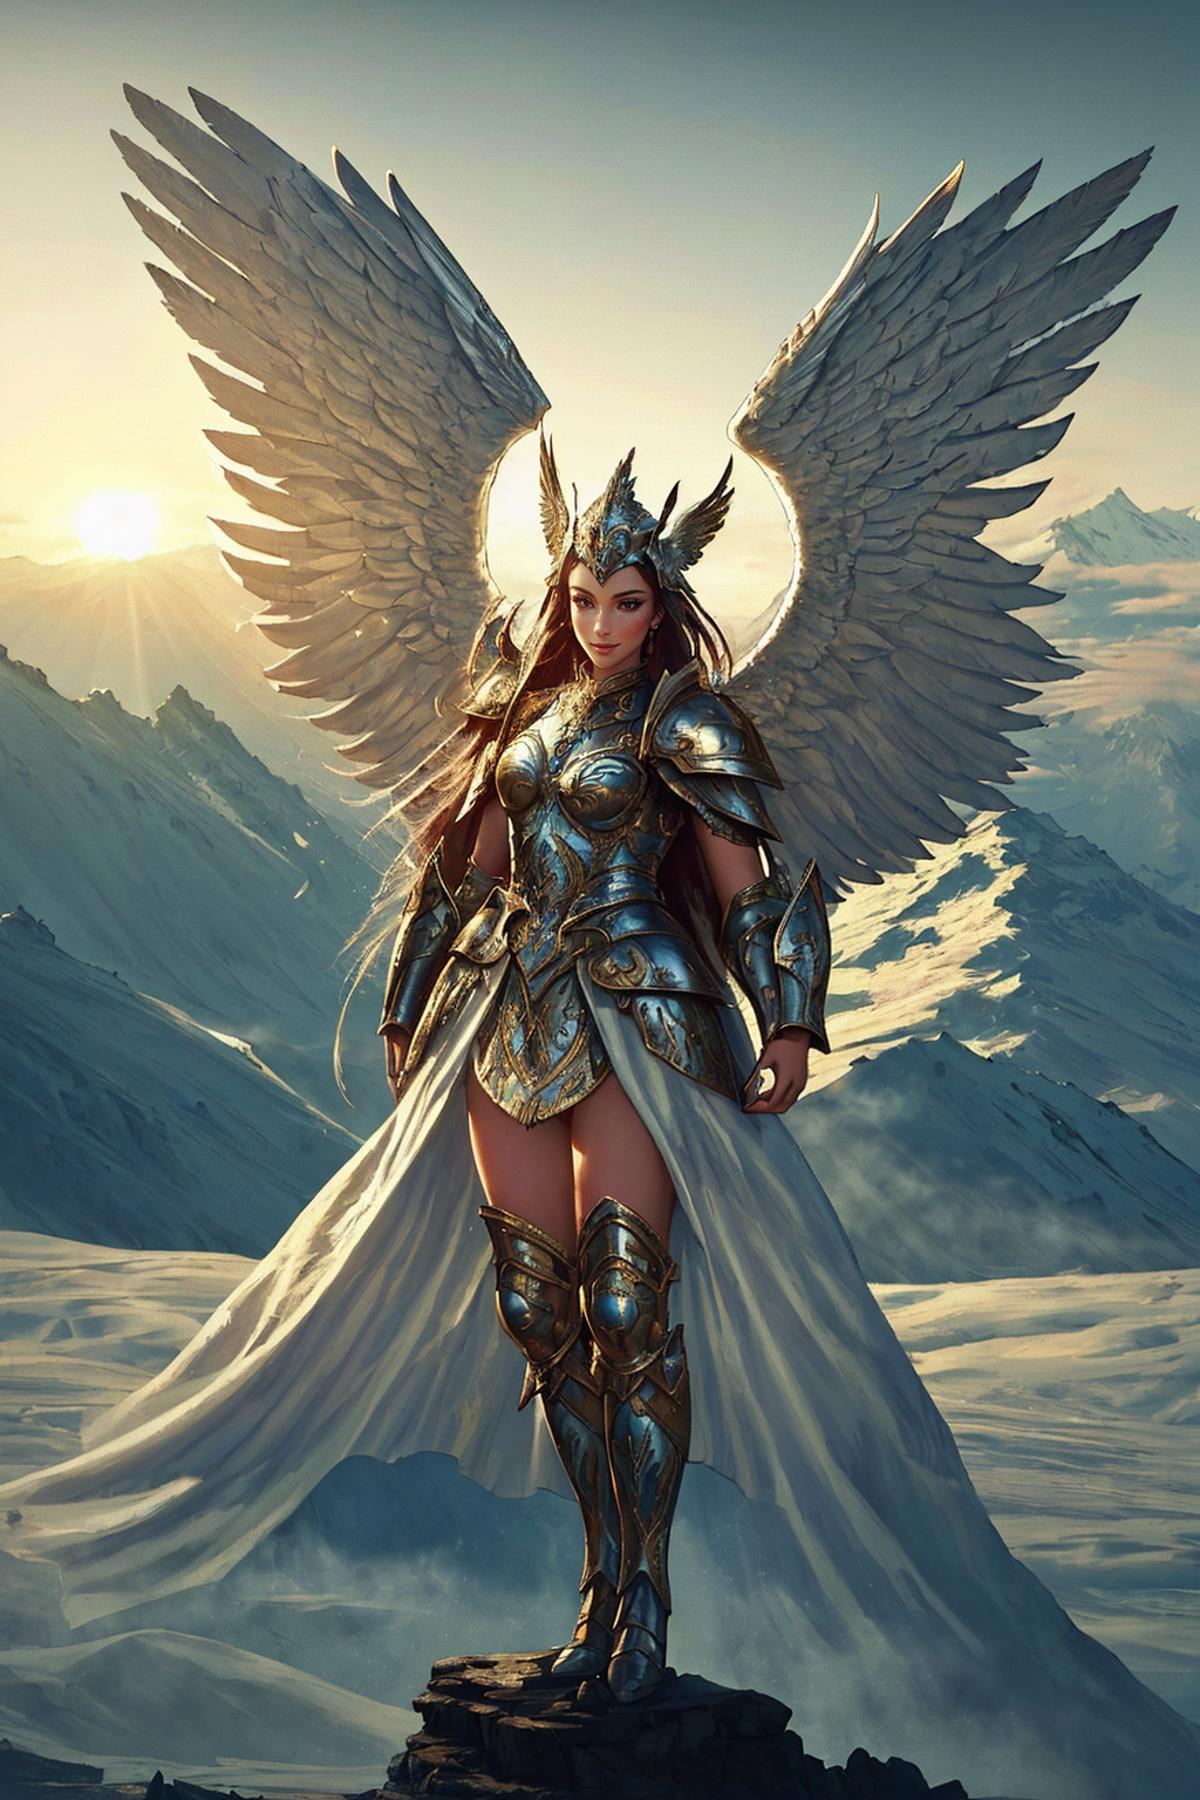 A fantasy illustration of a woman with angel wings and warrior garb, standing on snow-covered mountains.